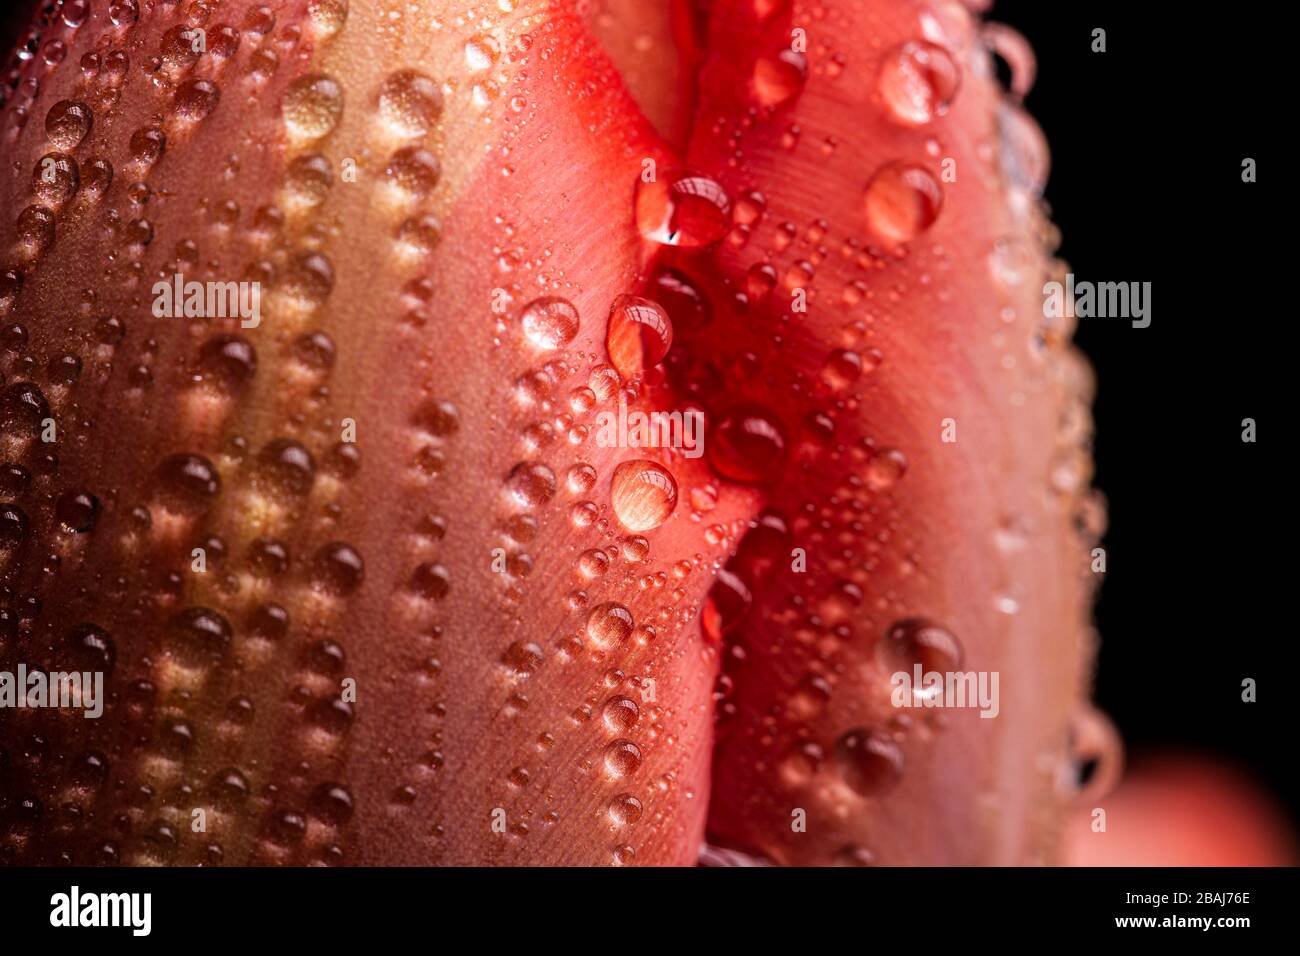 Rain water drops texture on a smooth red tulip flower petal in bloom close up still Stock Photo